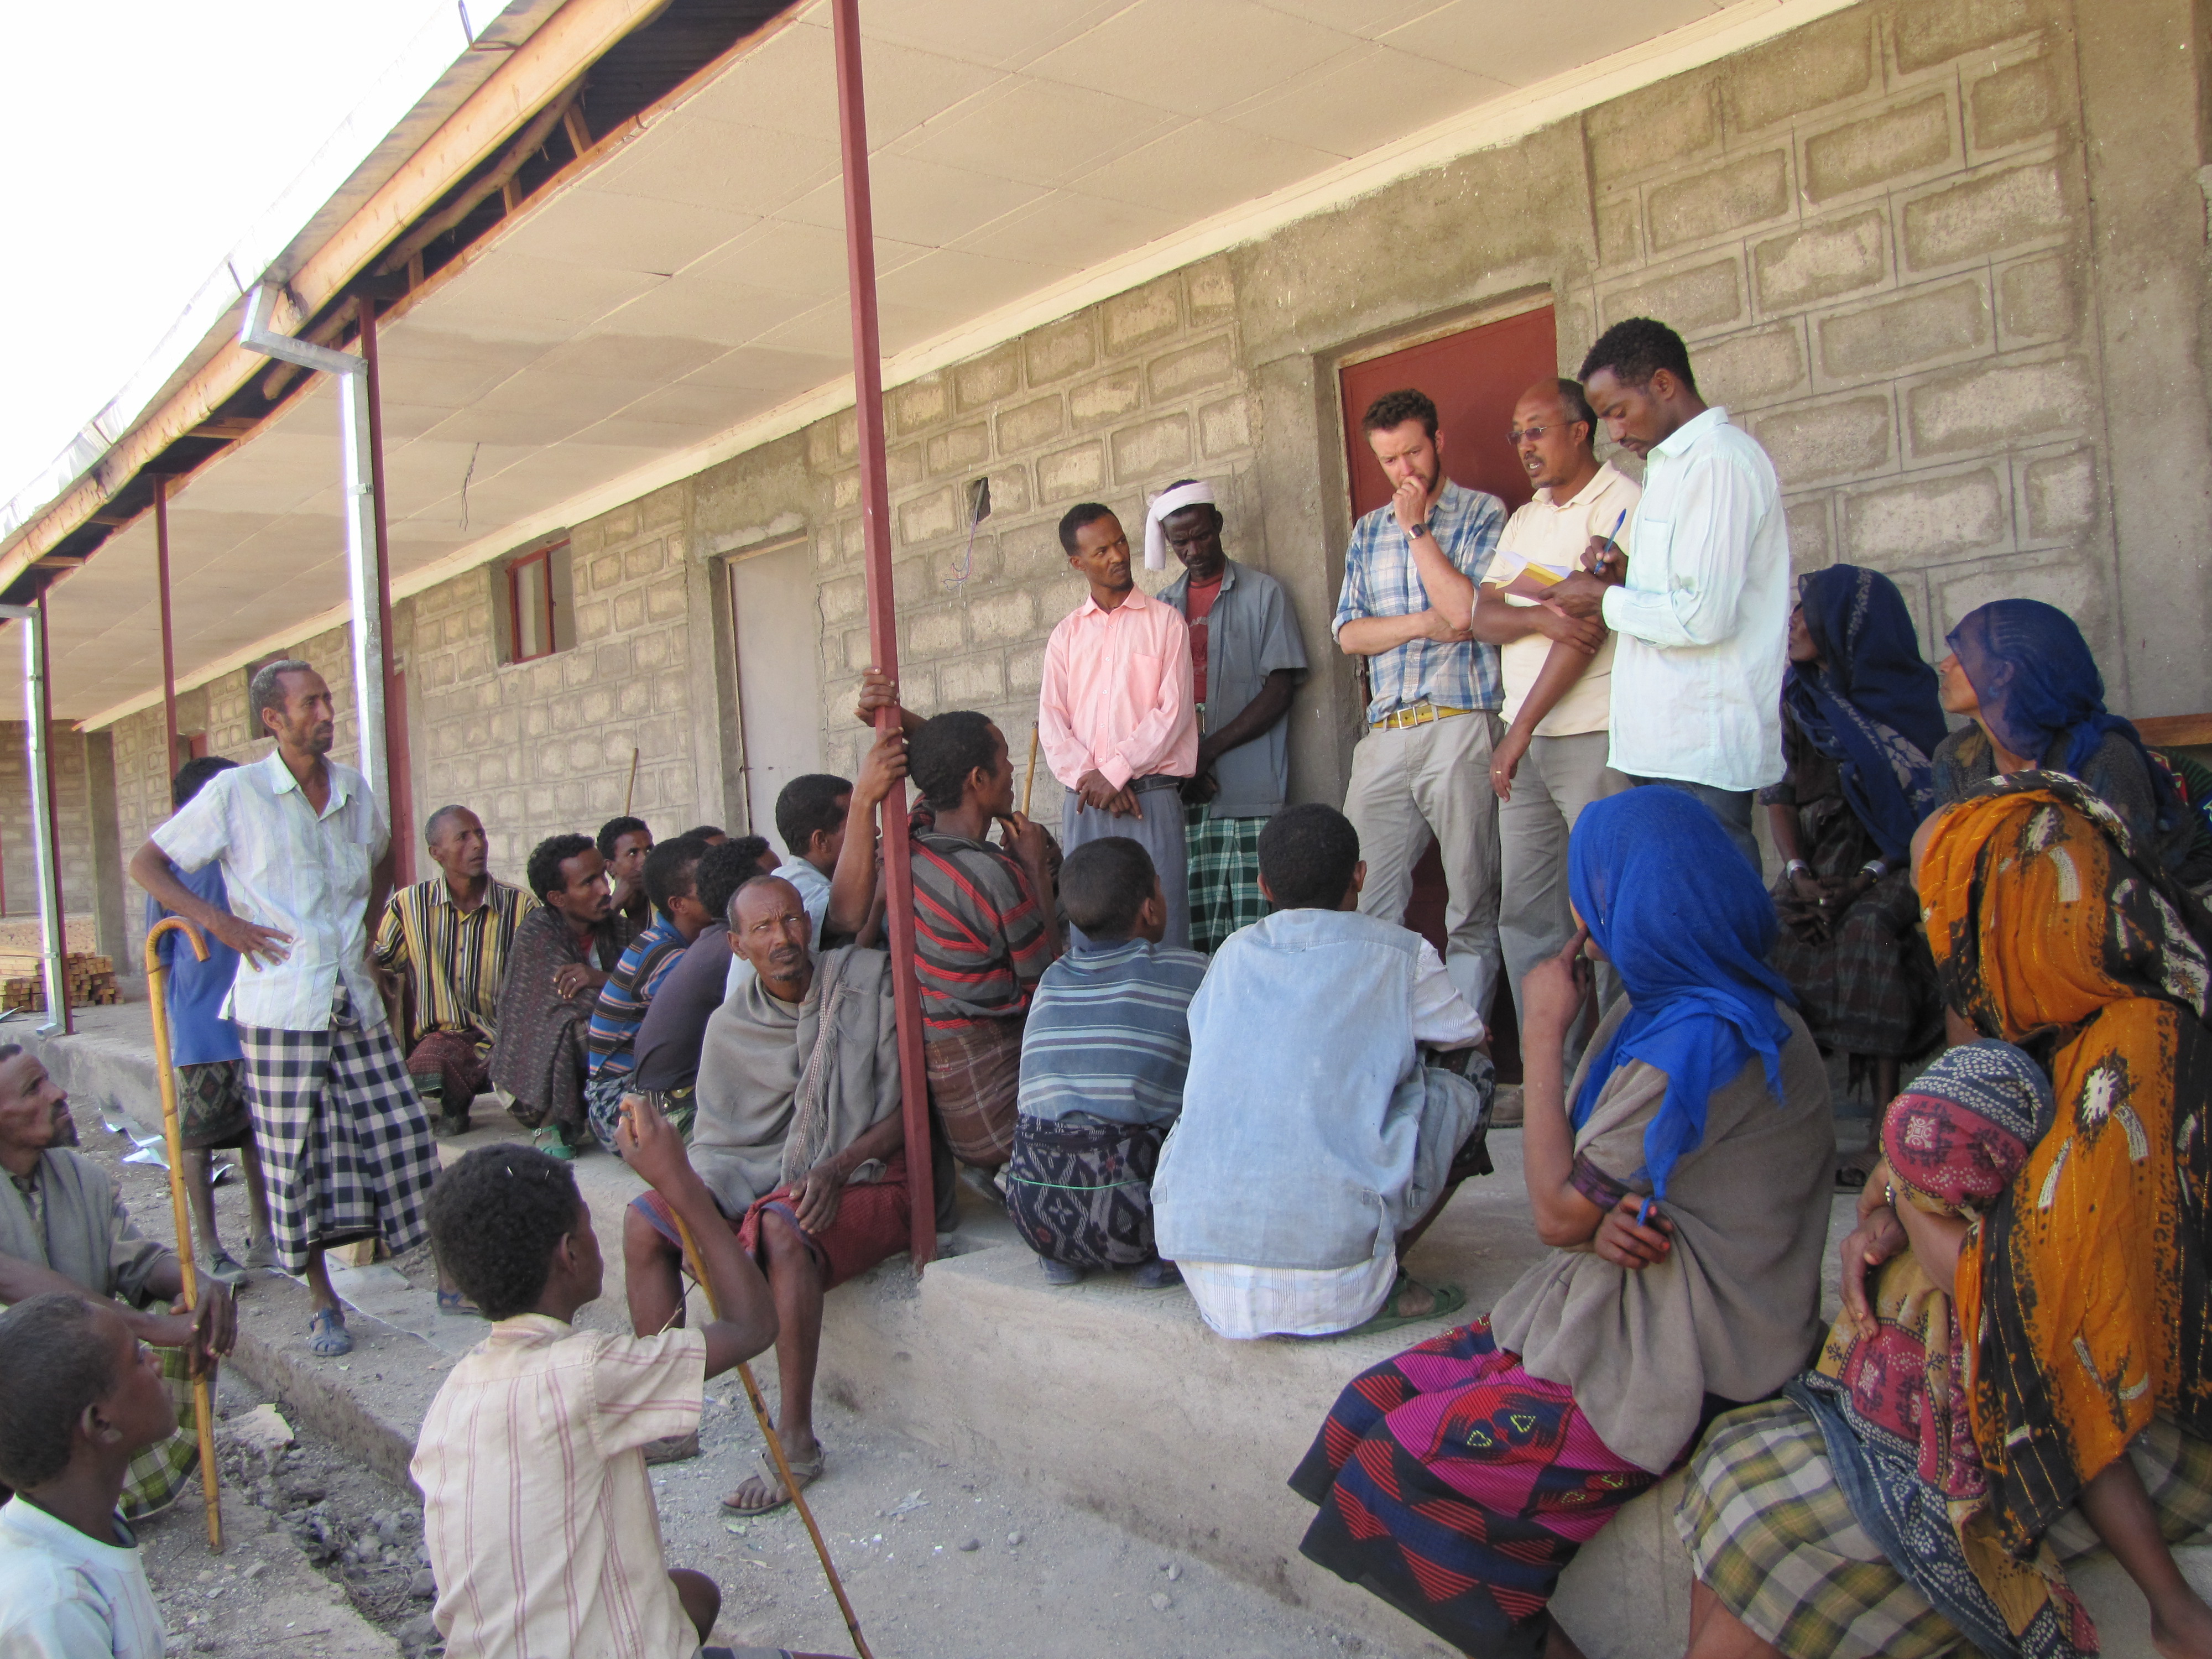 A few people stand and speak to a group of people seated on and around the porch of a building